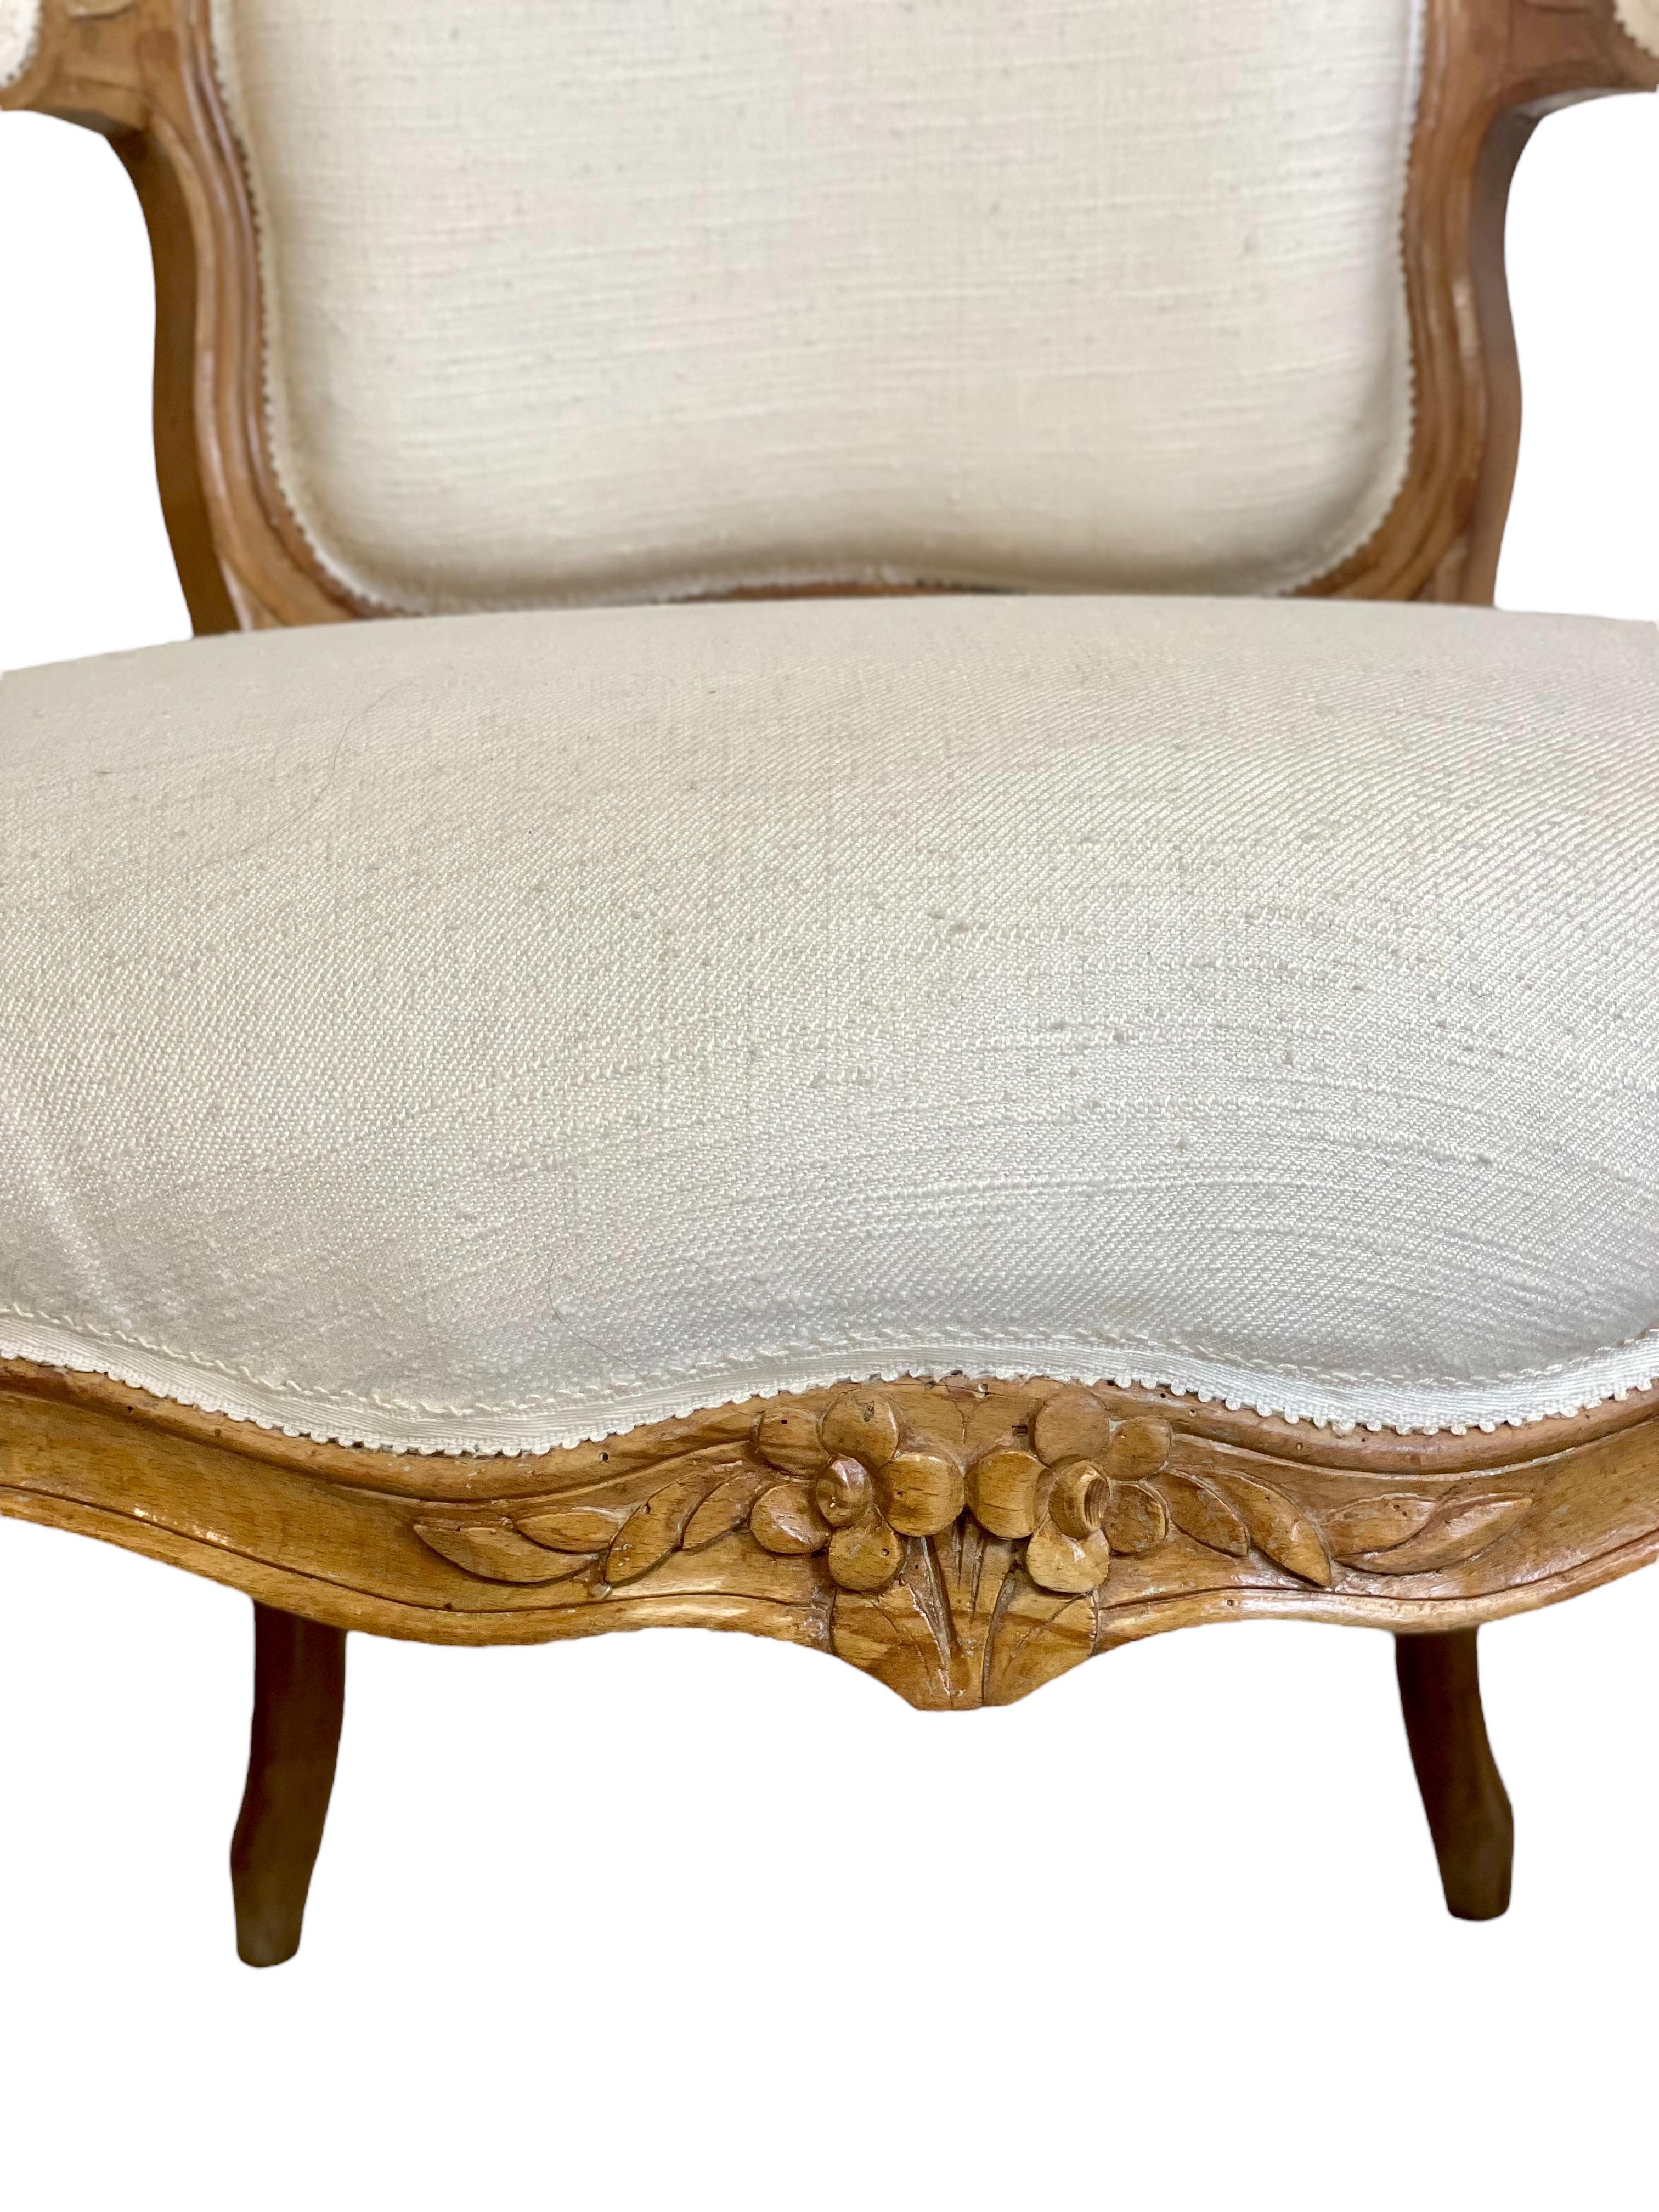 Hand-Carved Louis XV Period Pair of Walnut Cabriolets Armchairs, 18th Century For Sale